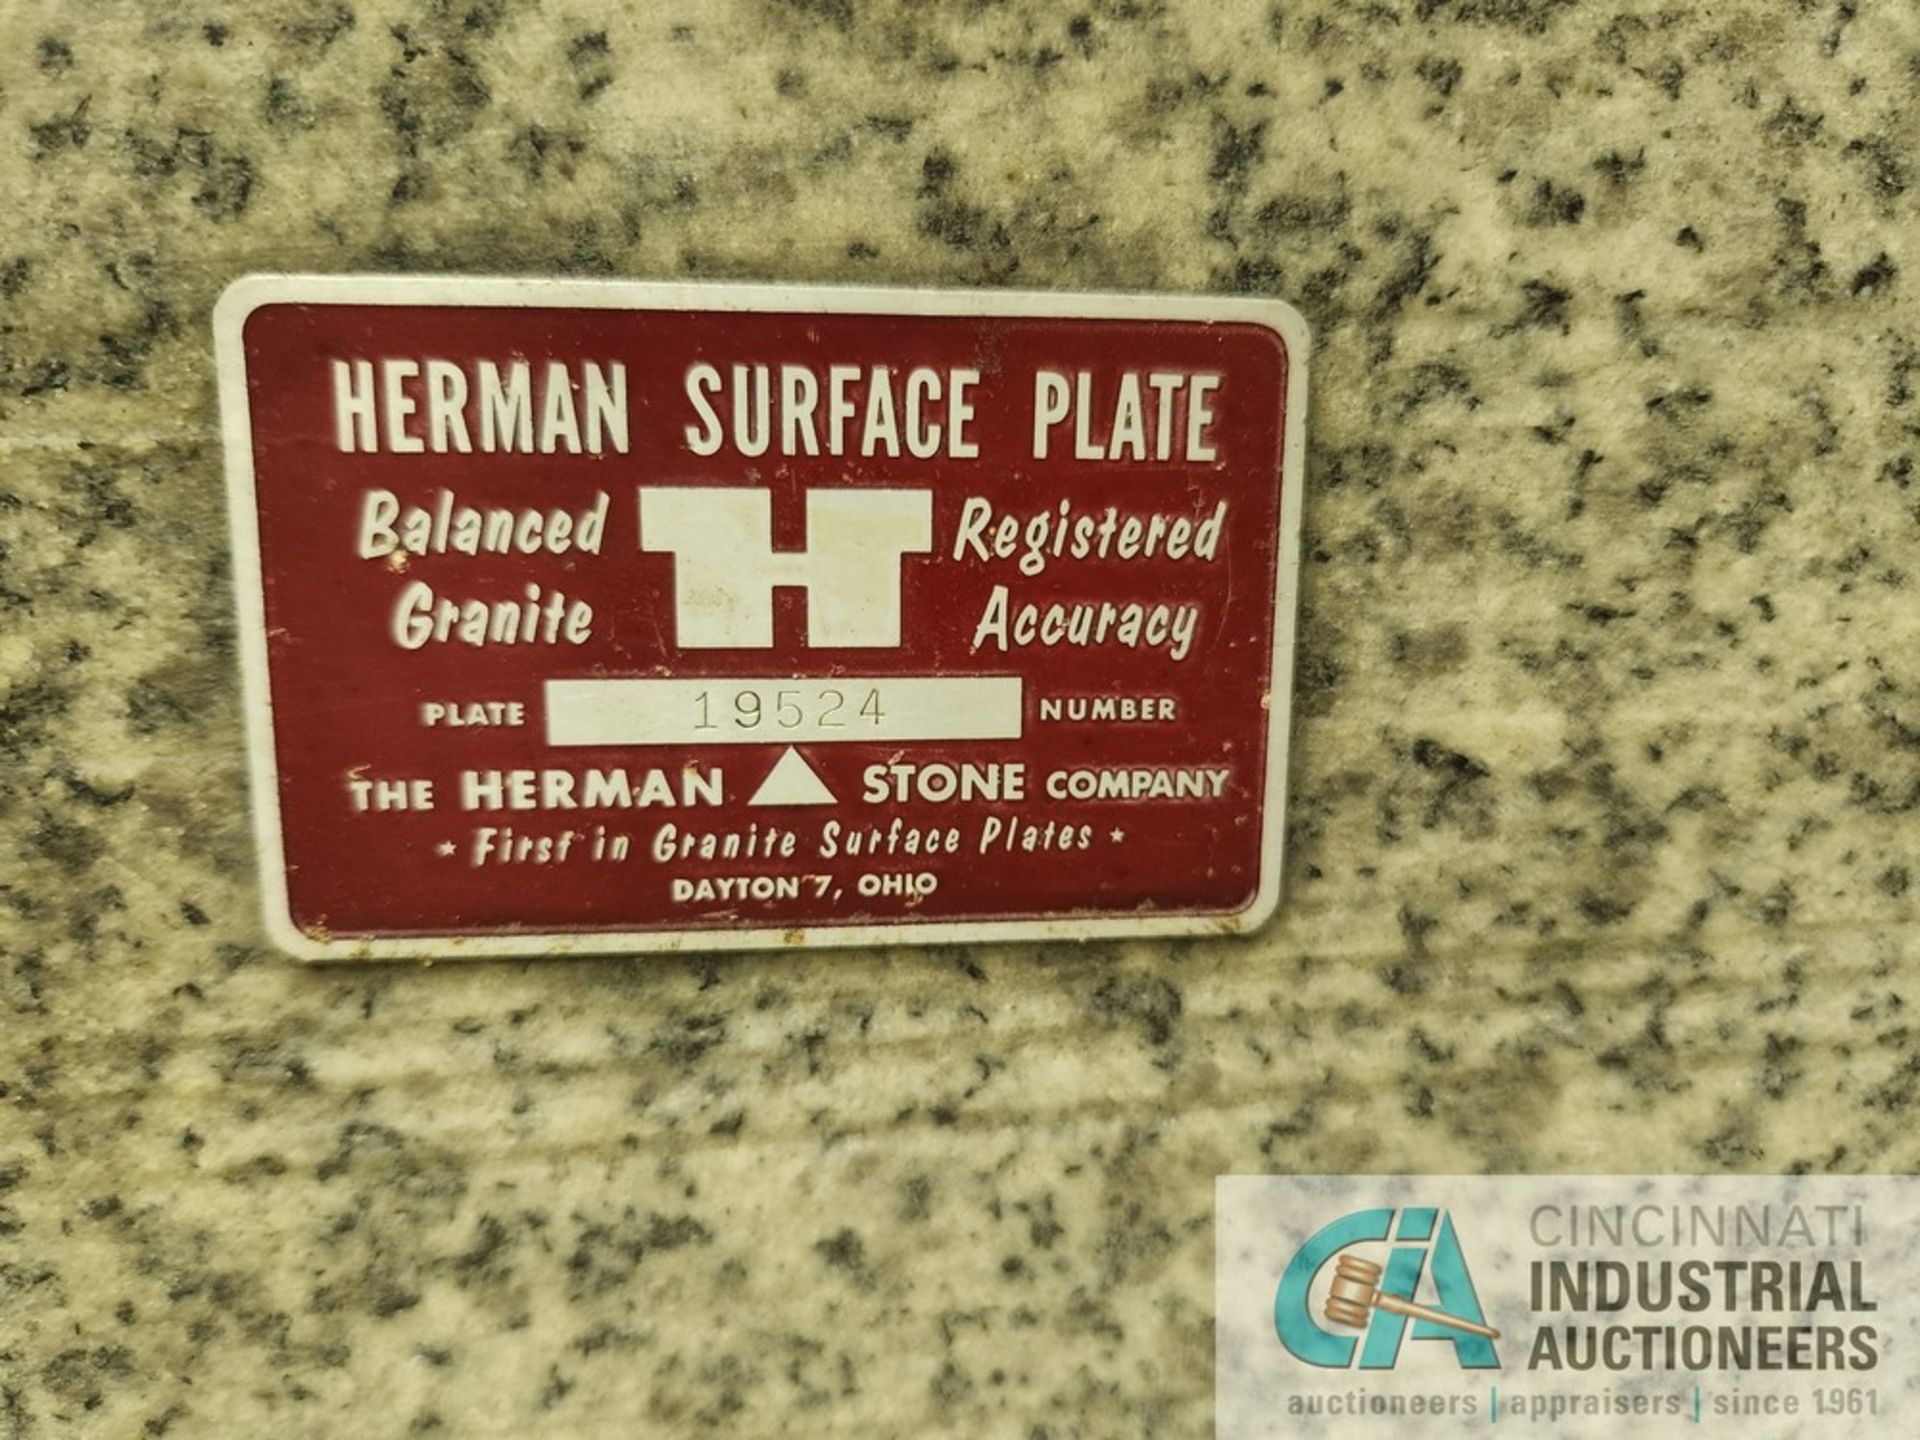 24" X 72" X 12" HERMAN GRANITE SURFACE PLATE W/ STAND - Image 3 of 3